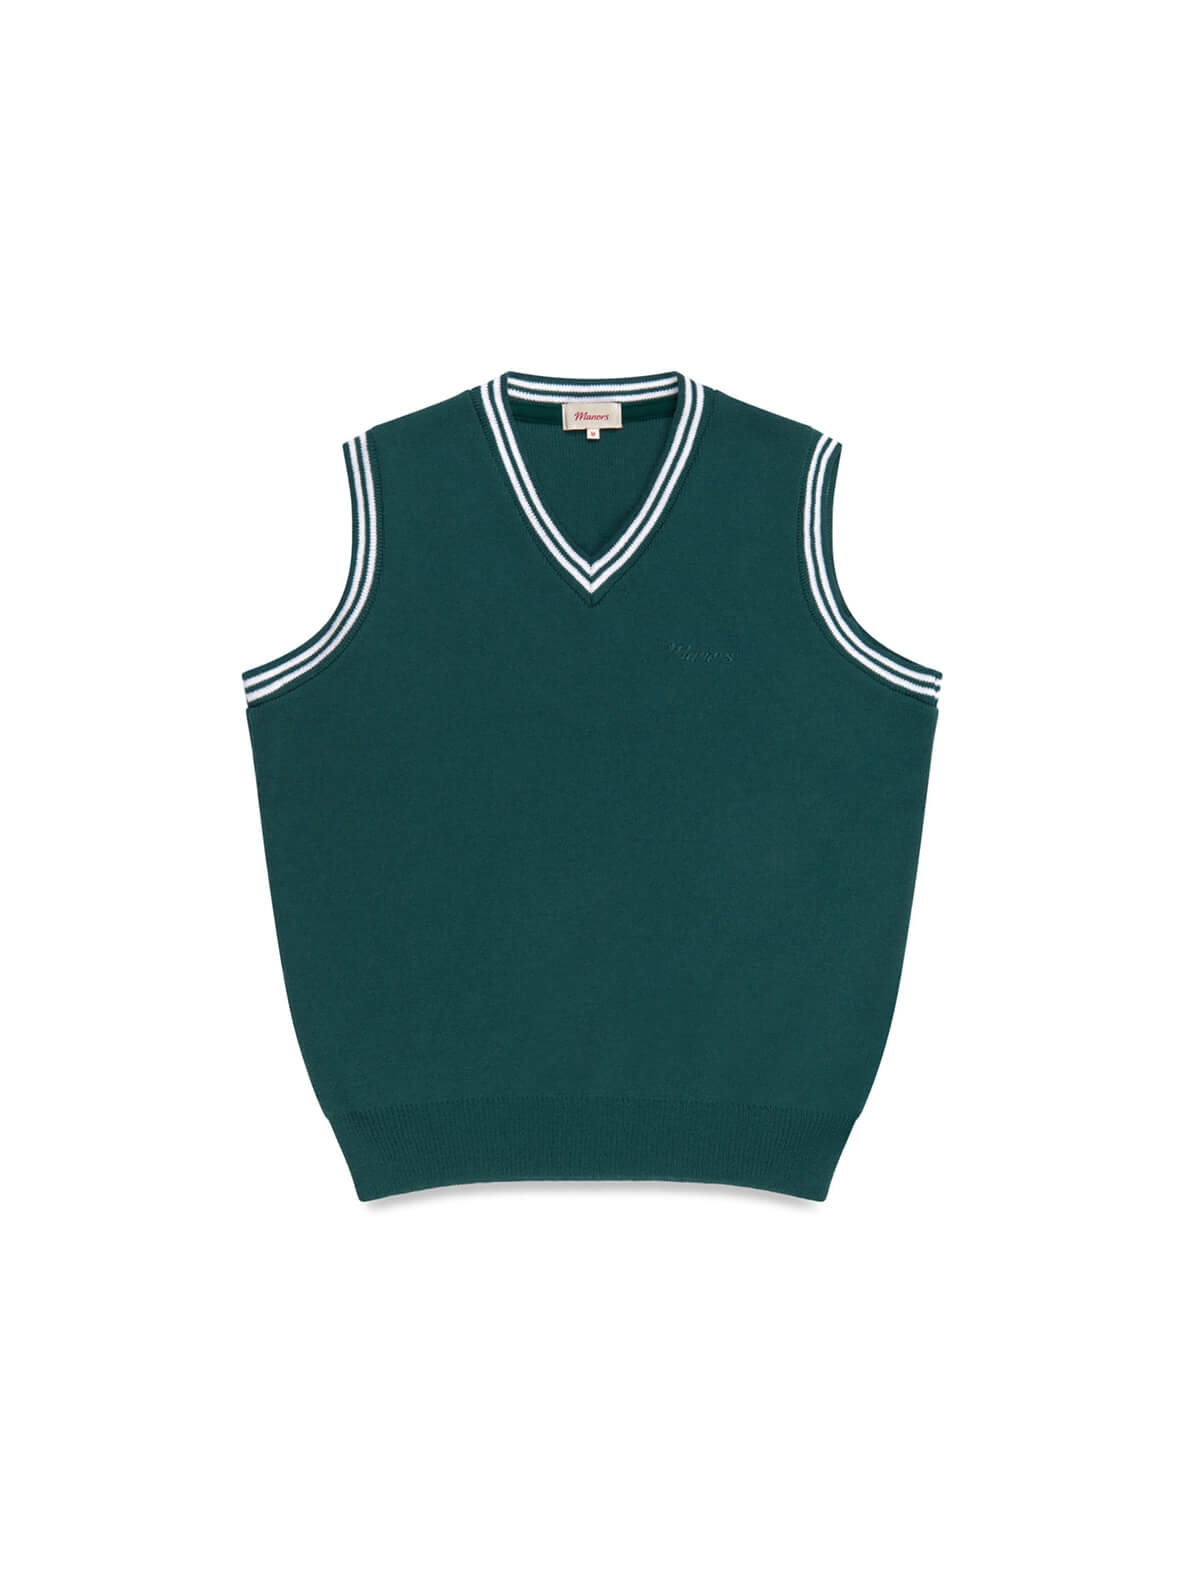 MANORS GOLF Classic Vest in Green